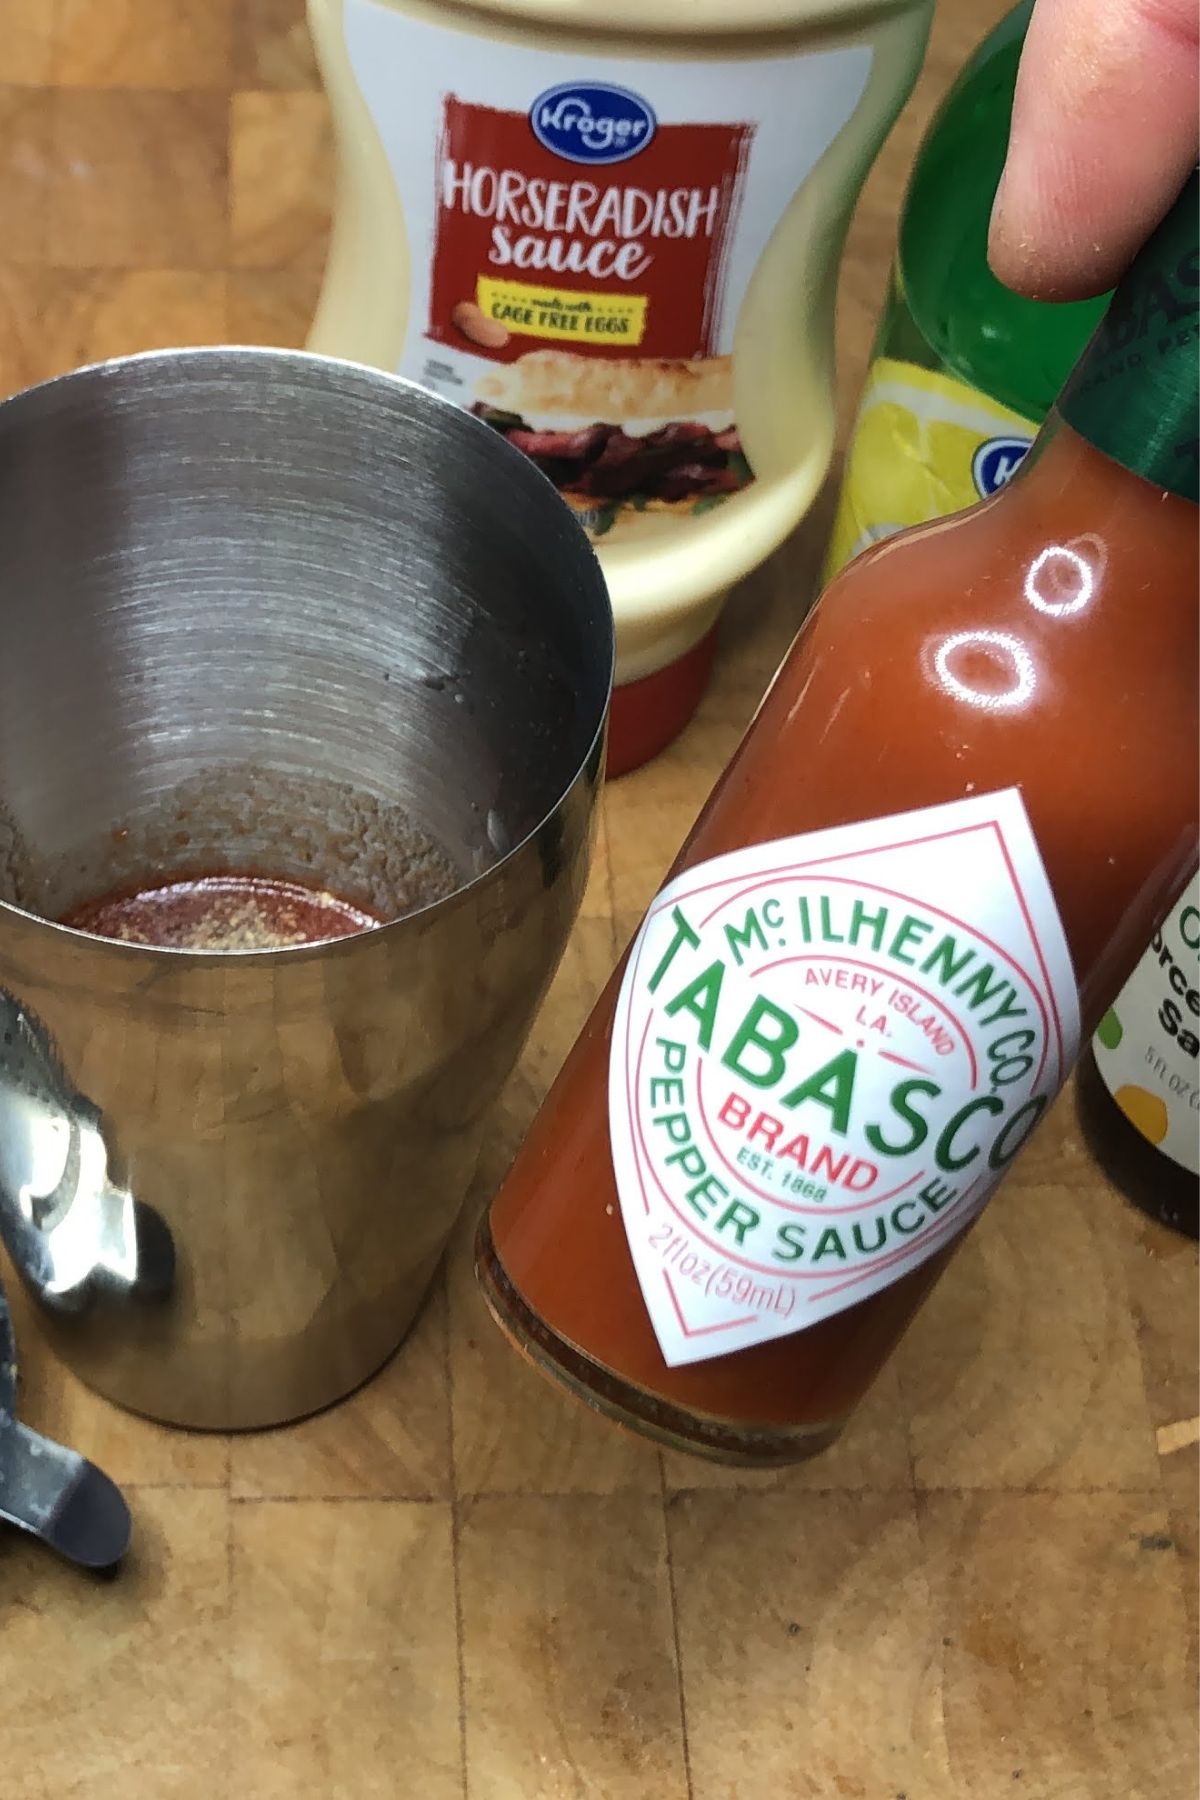 Bottle of tabasco sauce next to a shaker.